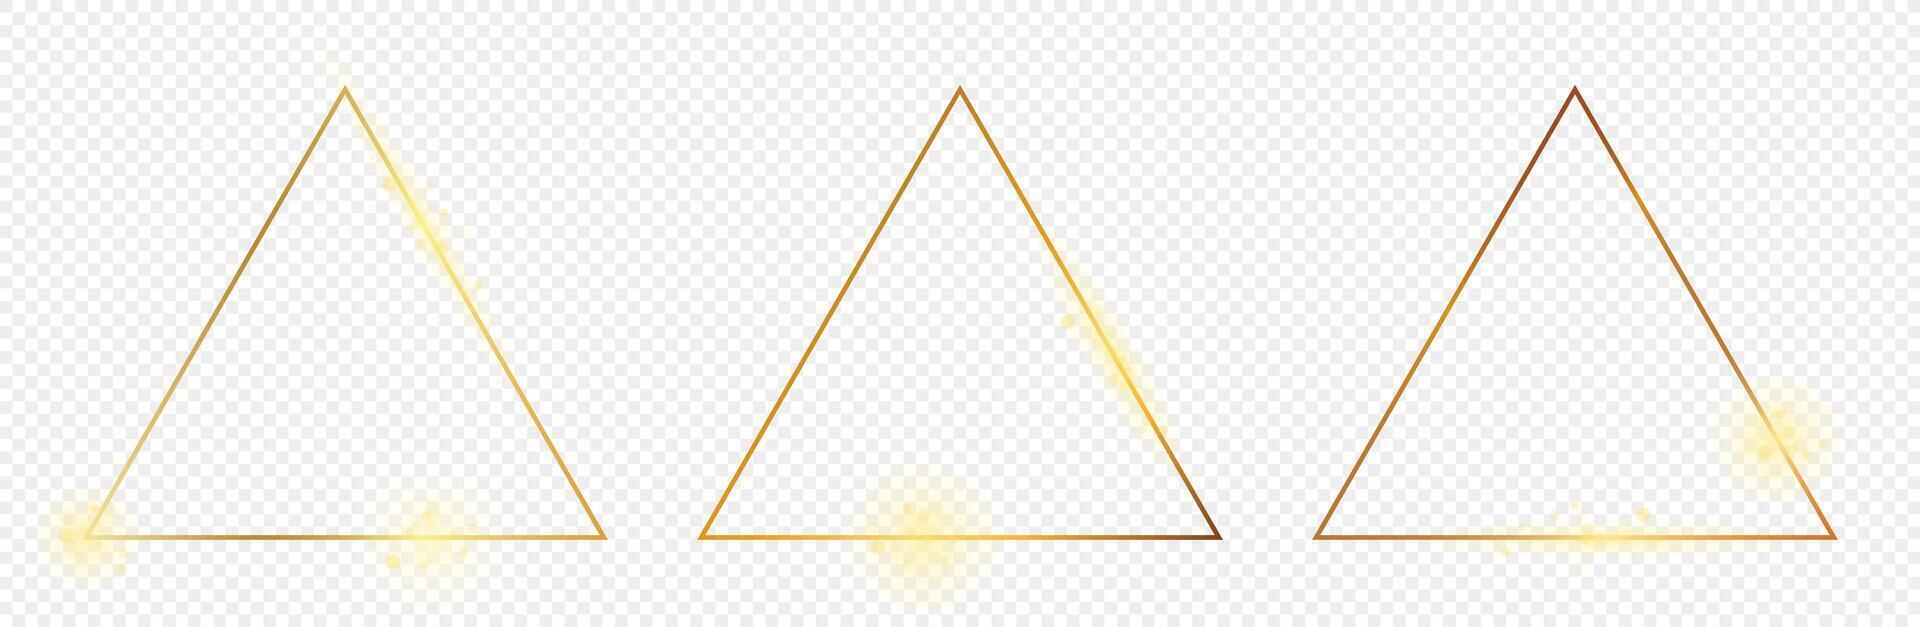 Gold glowing triangle frame vector